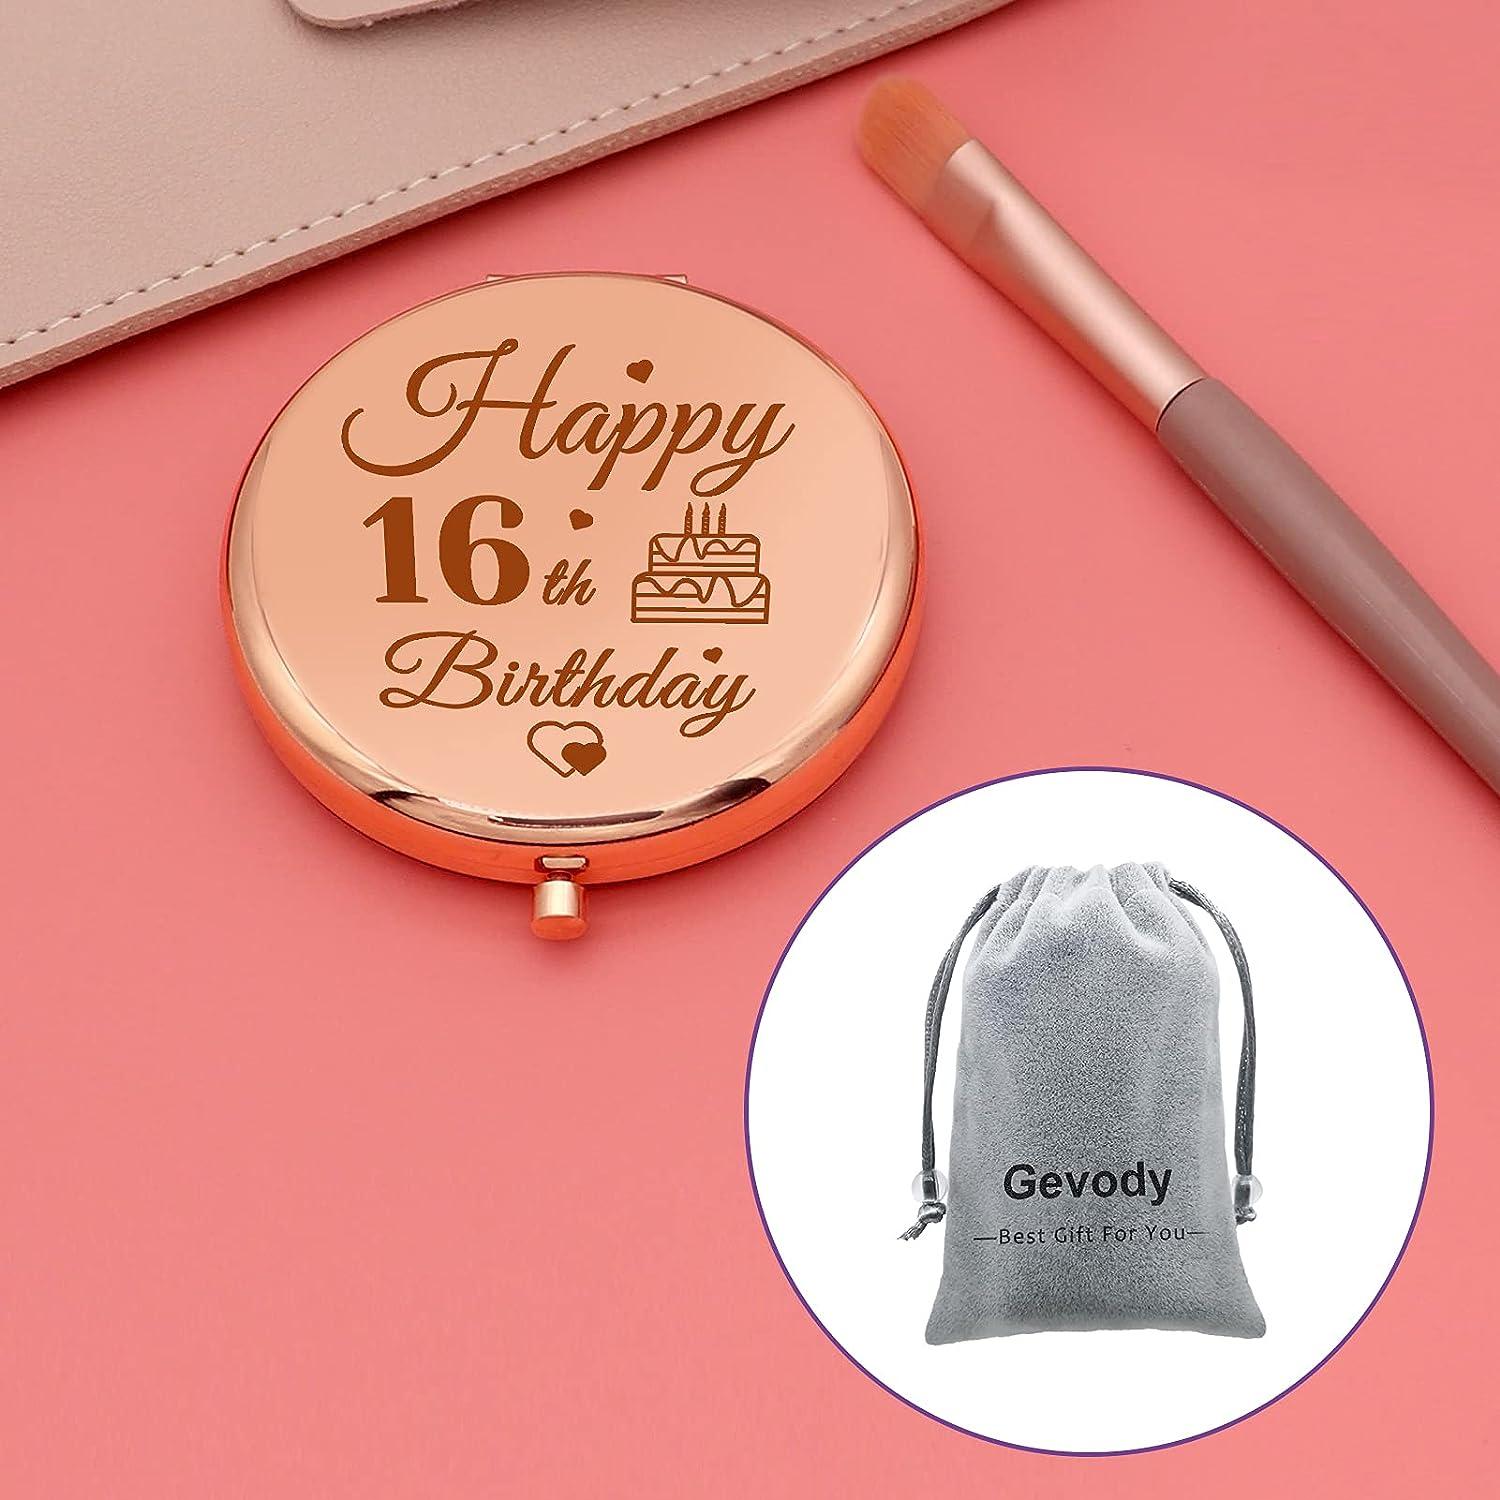 15th Birthday Gifts for Teen Girls, 15 Year Old Girl Gifts for Birthday, Birthday  Gifts for 15 Year Old Girls, Present for 15 Year Old Girl, 15th Birthday  Mirror, 15th Birthday Makeup